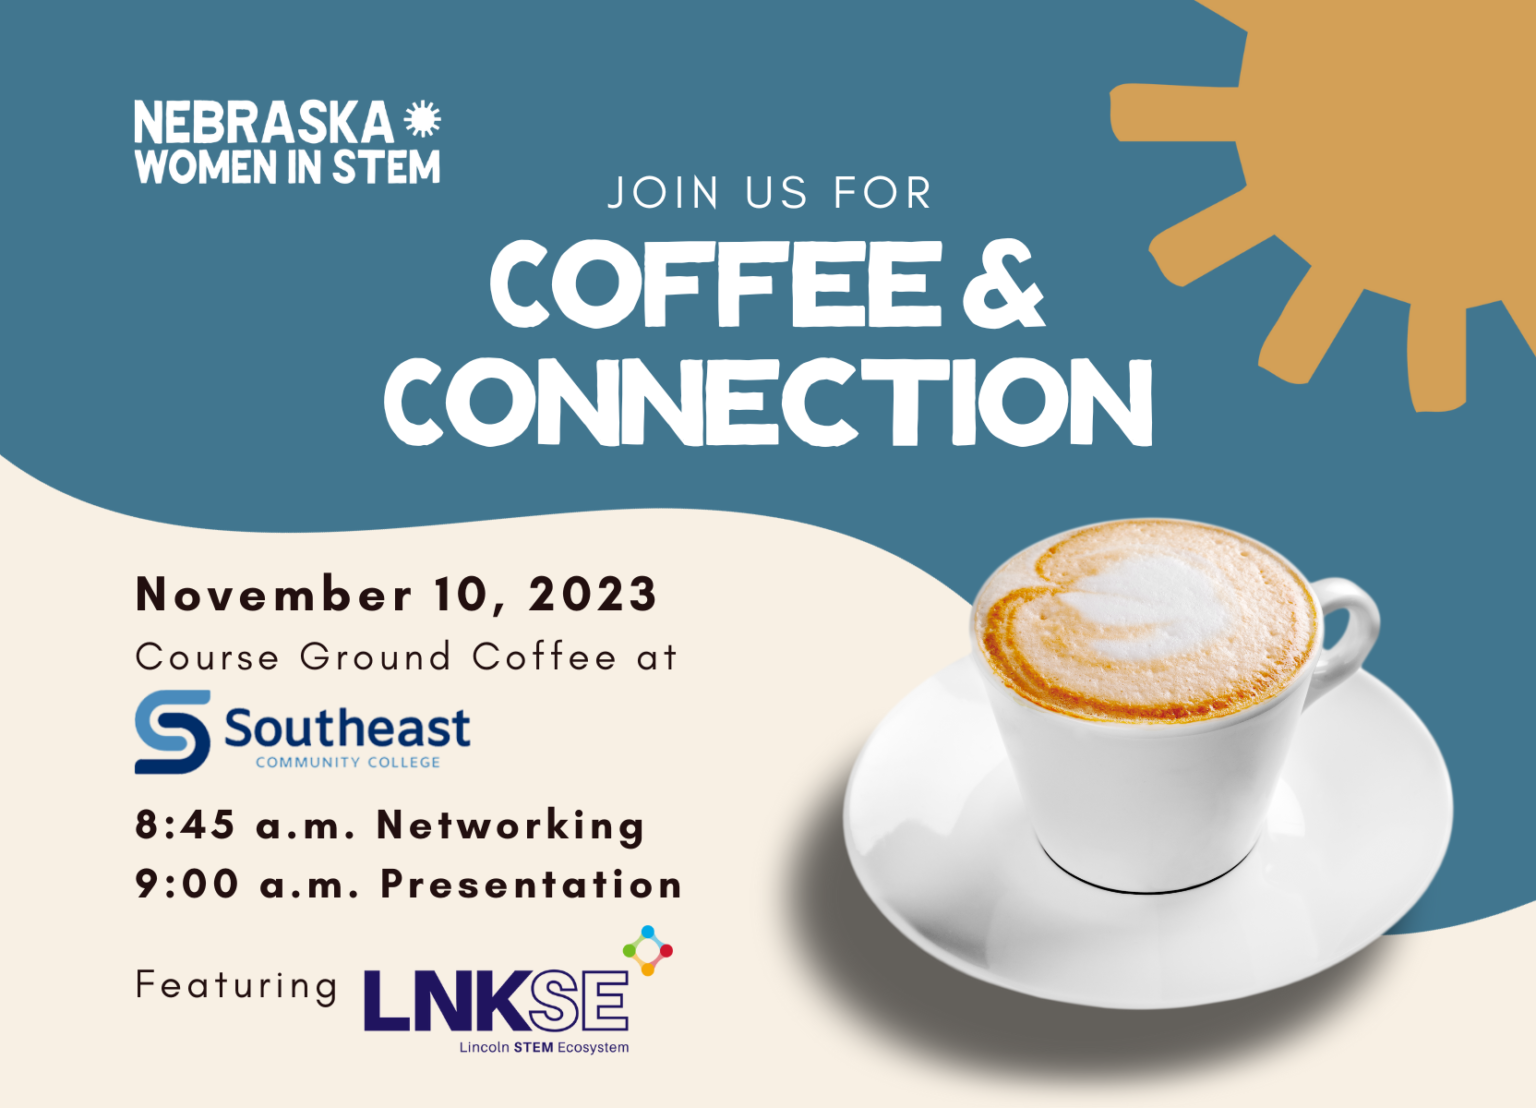 Join us for Coffee & Connection